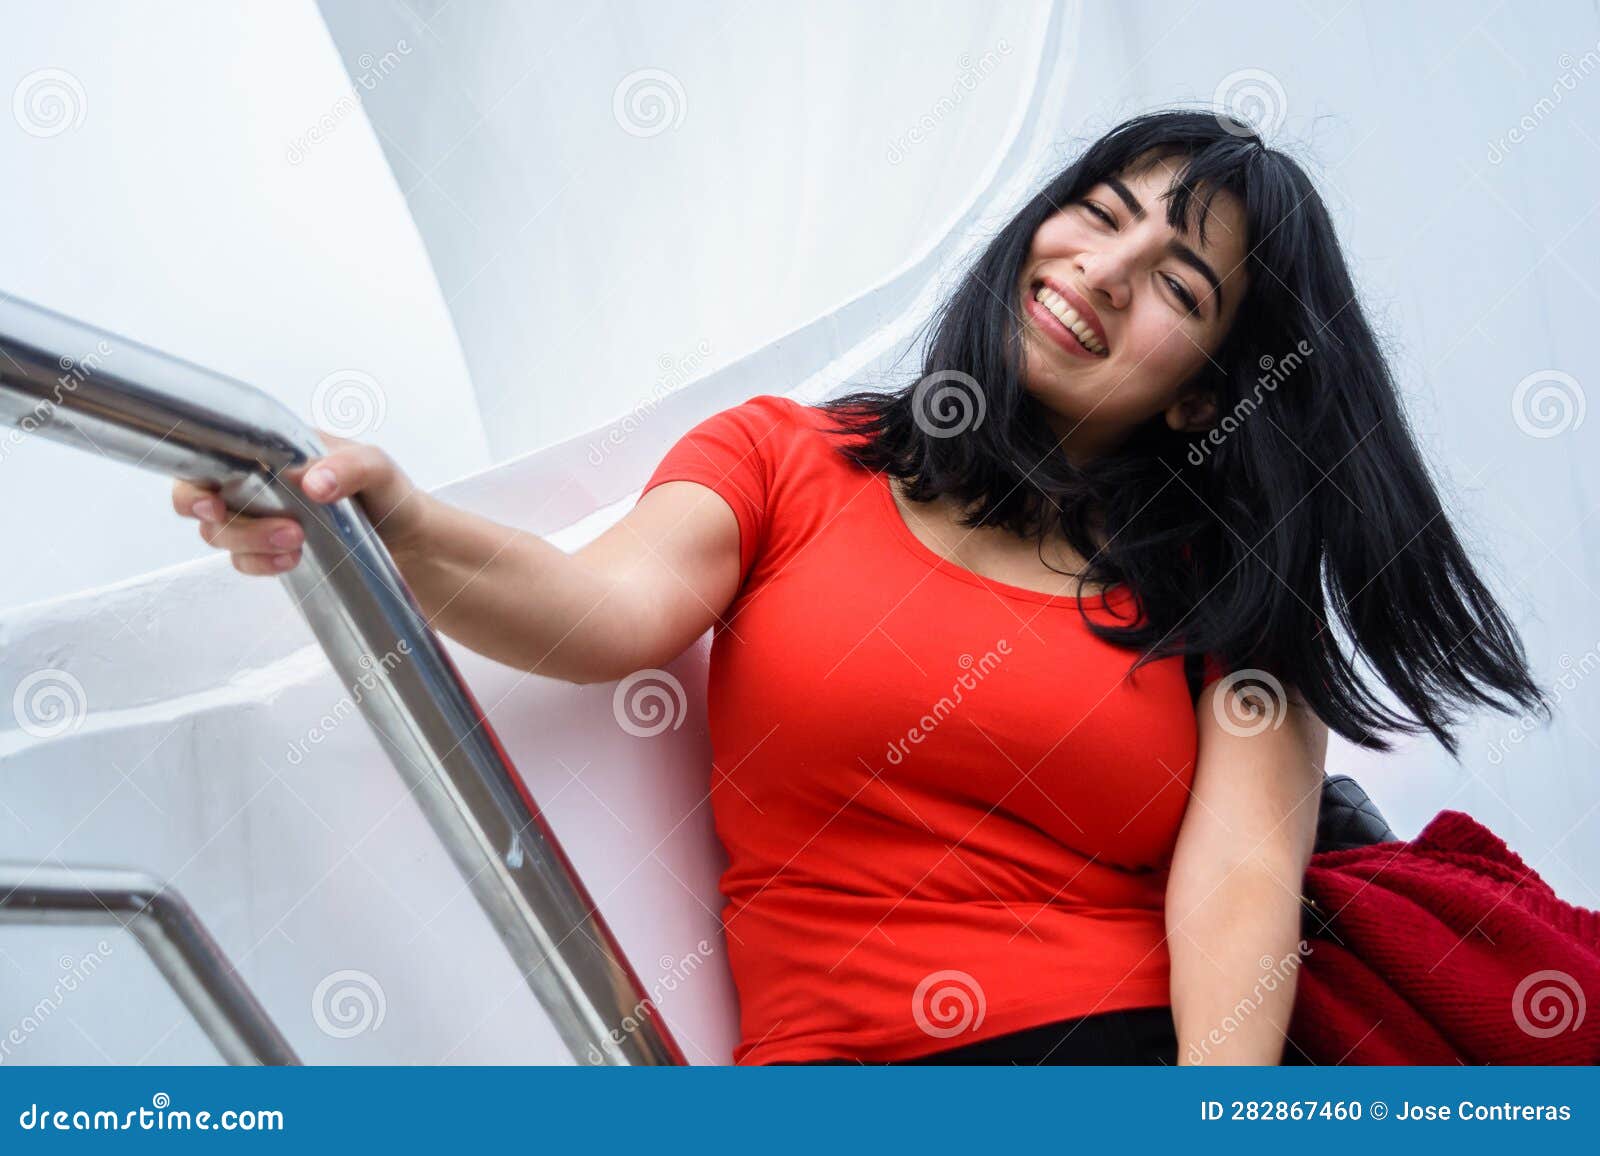 young latin woman sitting on puente de la mujer in buenos aires, smiling enjoying the vacation day